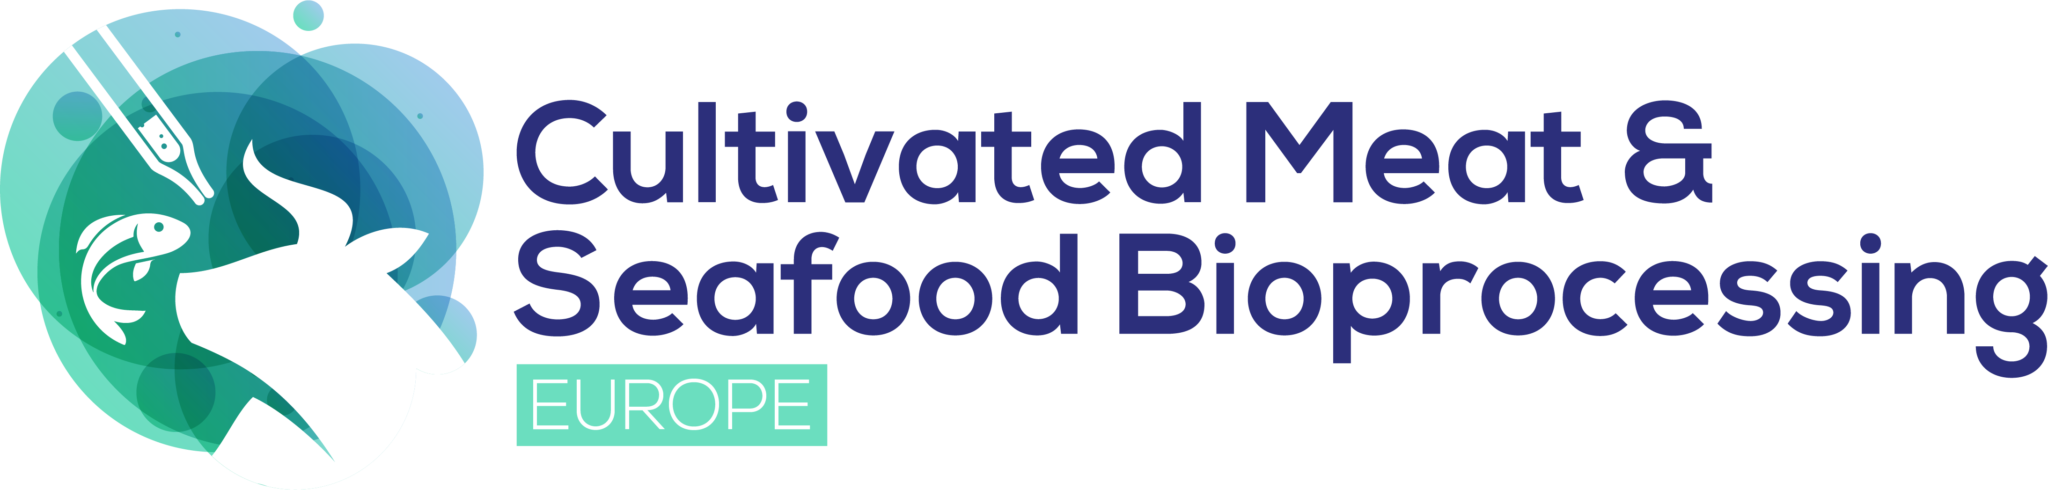 Cultivated Meats & Seafood Bioprocessing Summit Logo